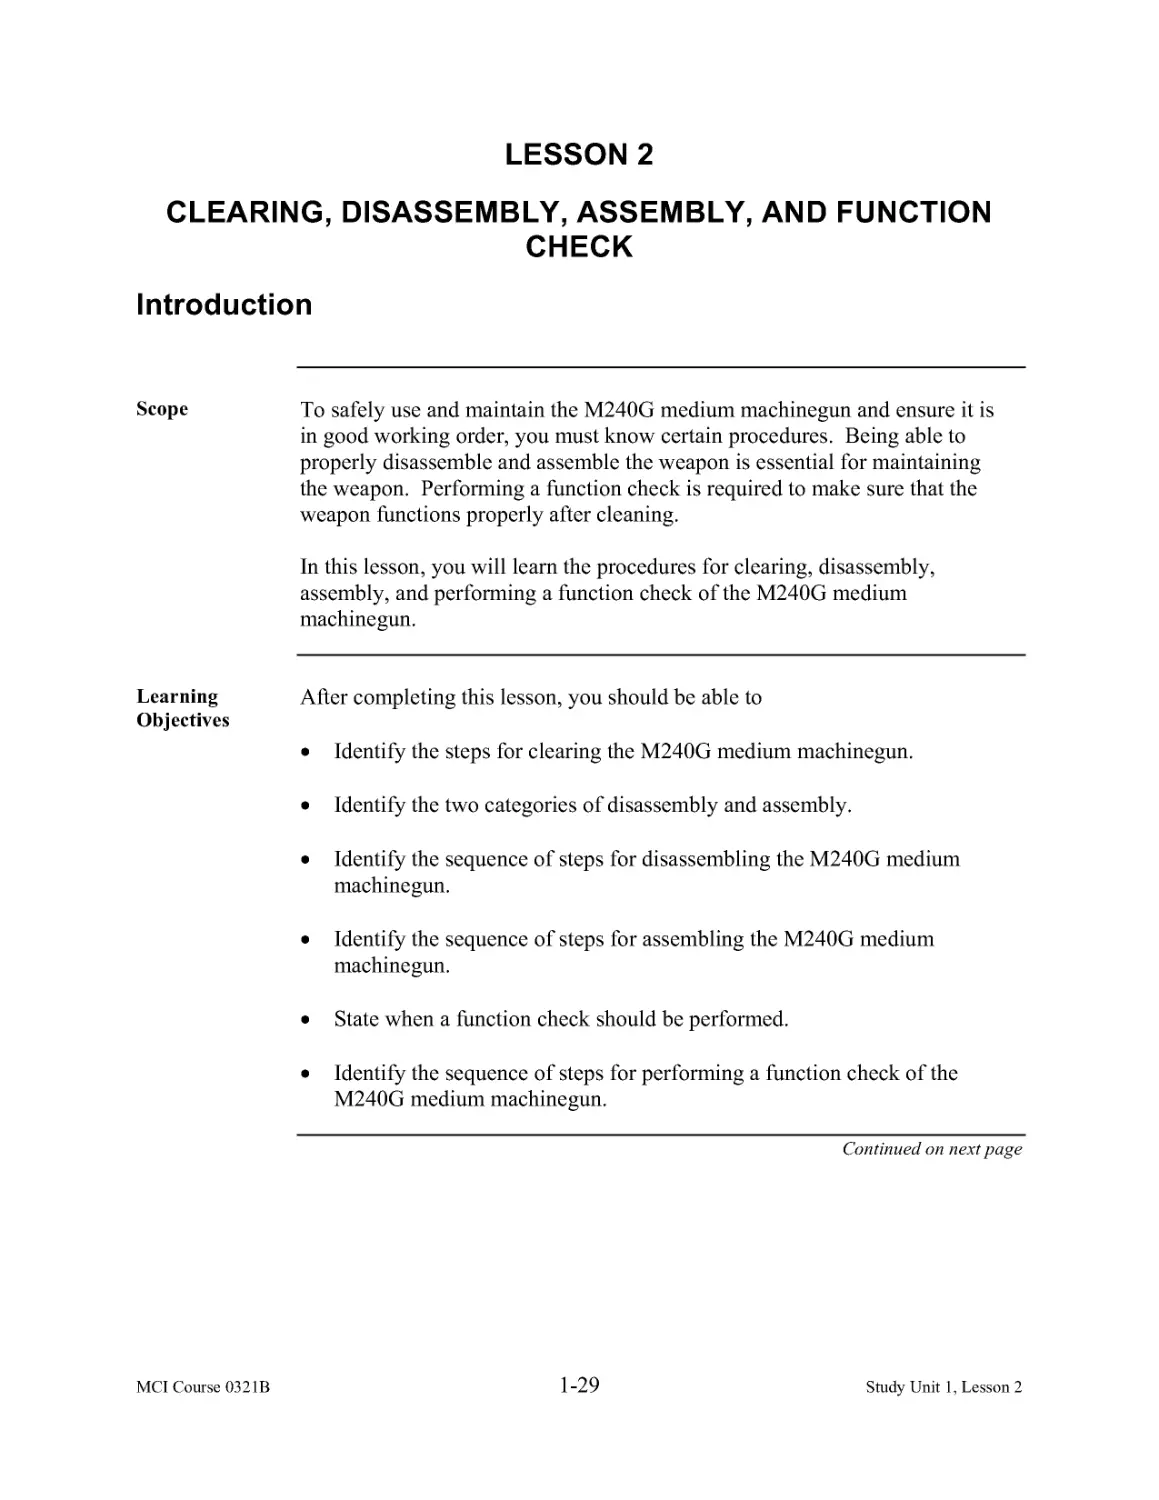 Lesson 2:  Clearing, Disassembly, Assembly, and Function Check